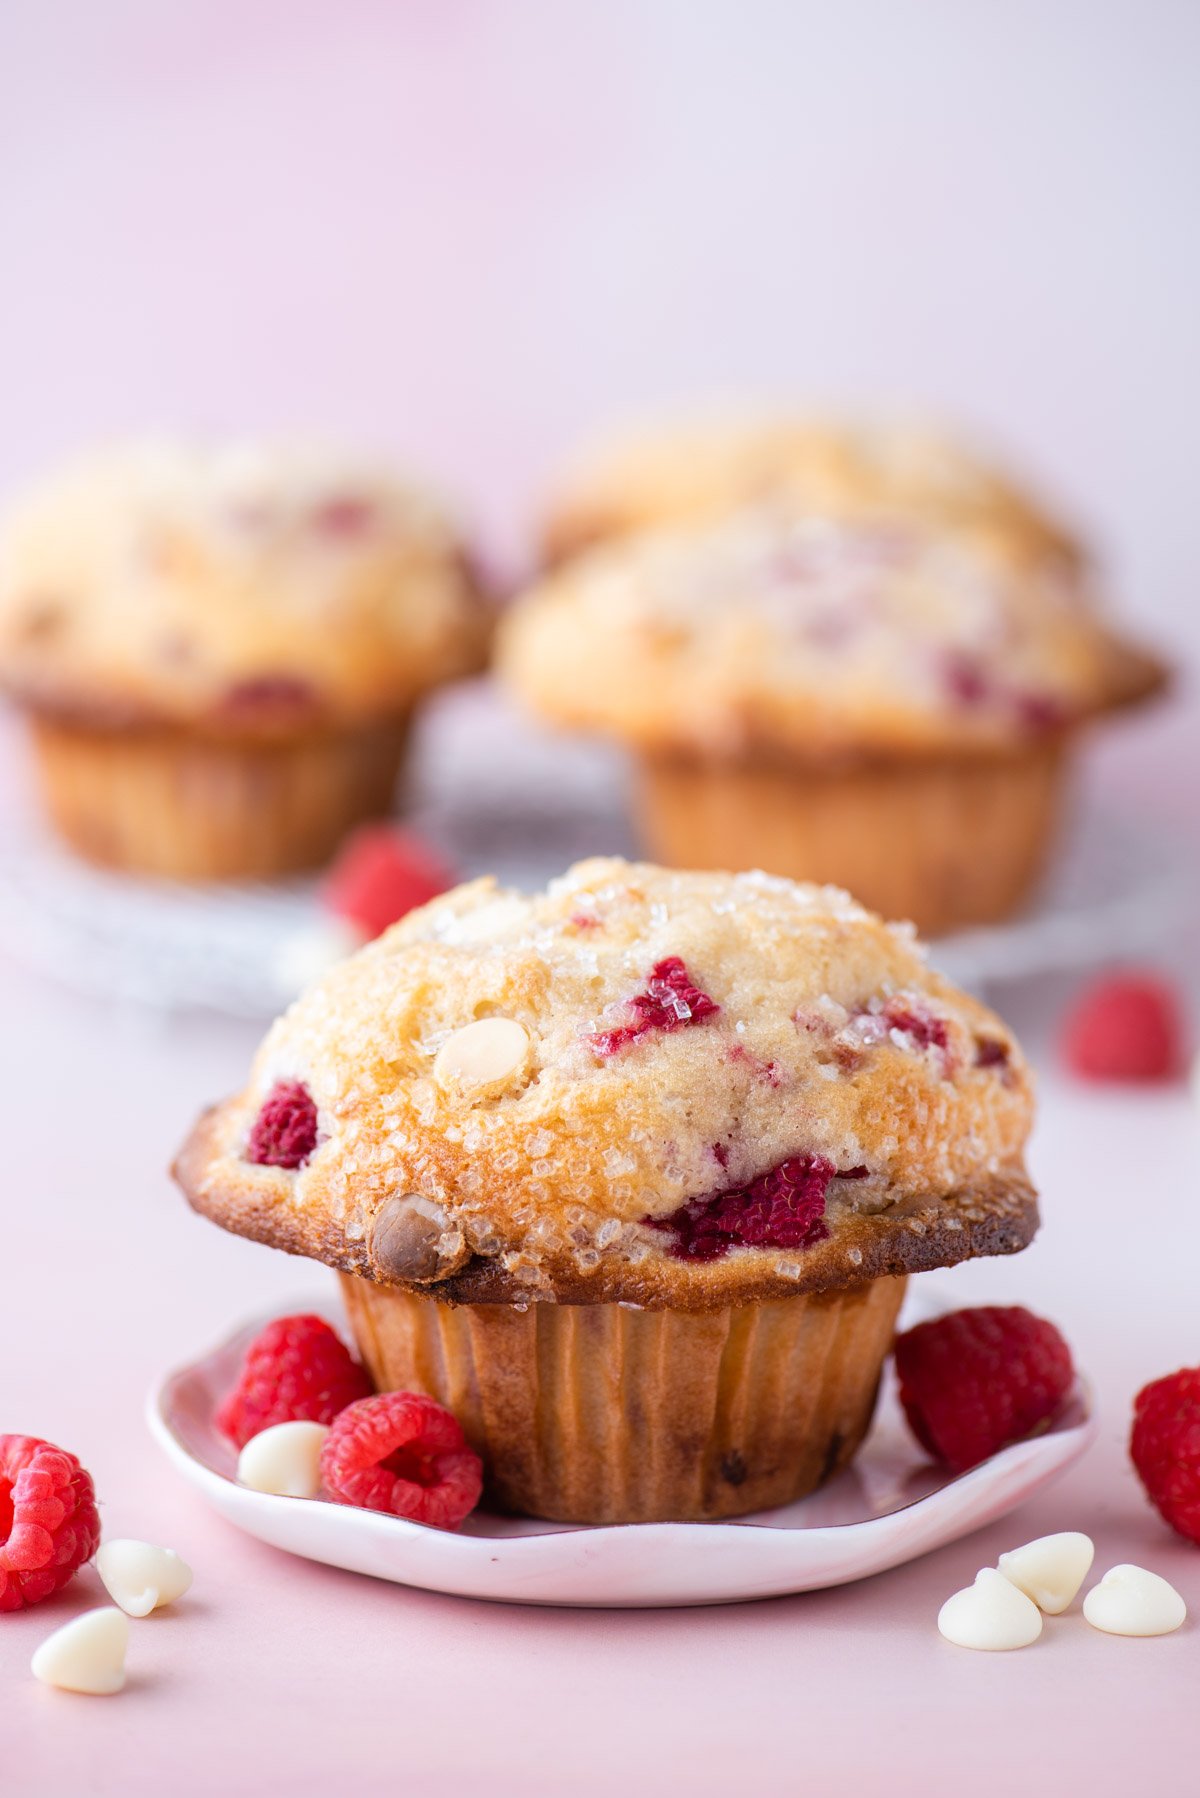 a raspberry chocolate chip muffin on a small white plate on a pink surface with fresh raspberries and white chocolate chips sprinkled around it and more muffins in the background